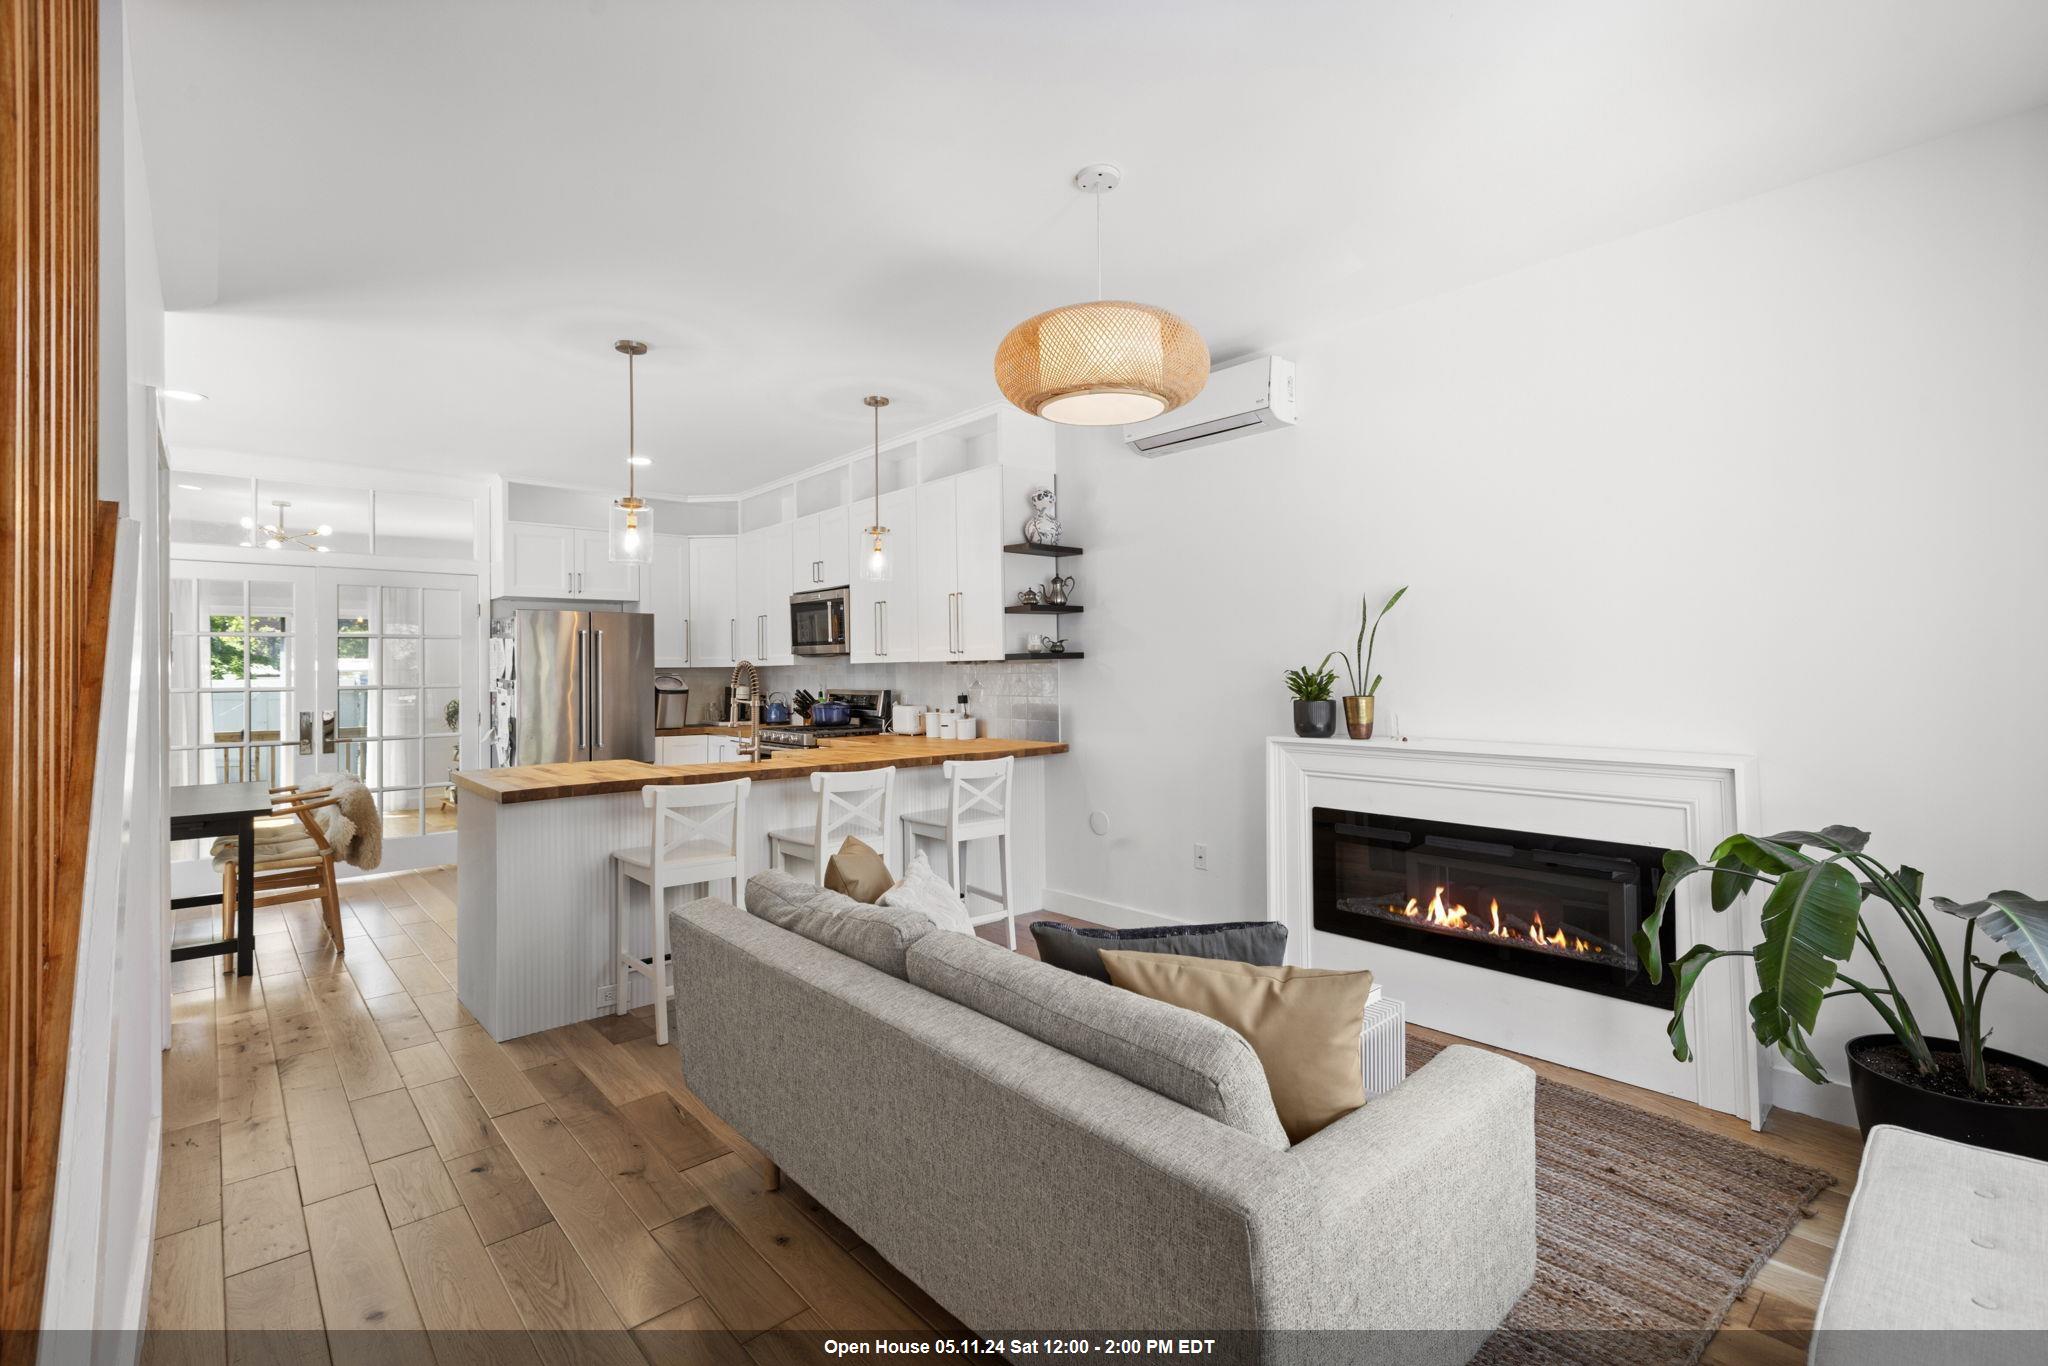 a living room with stainless steel appliances furniture a fireplace and wooden floor